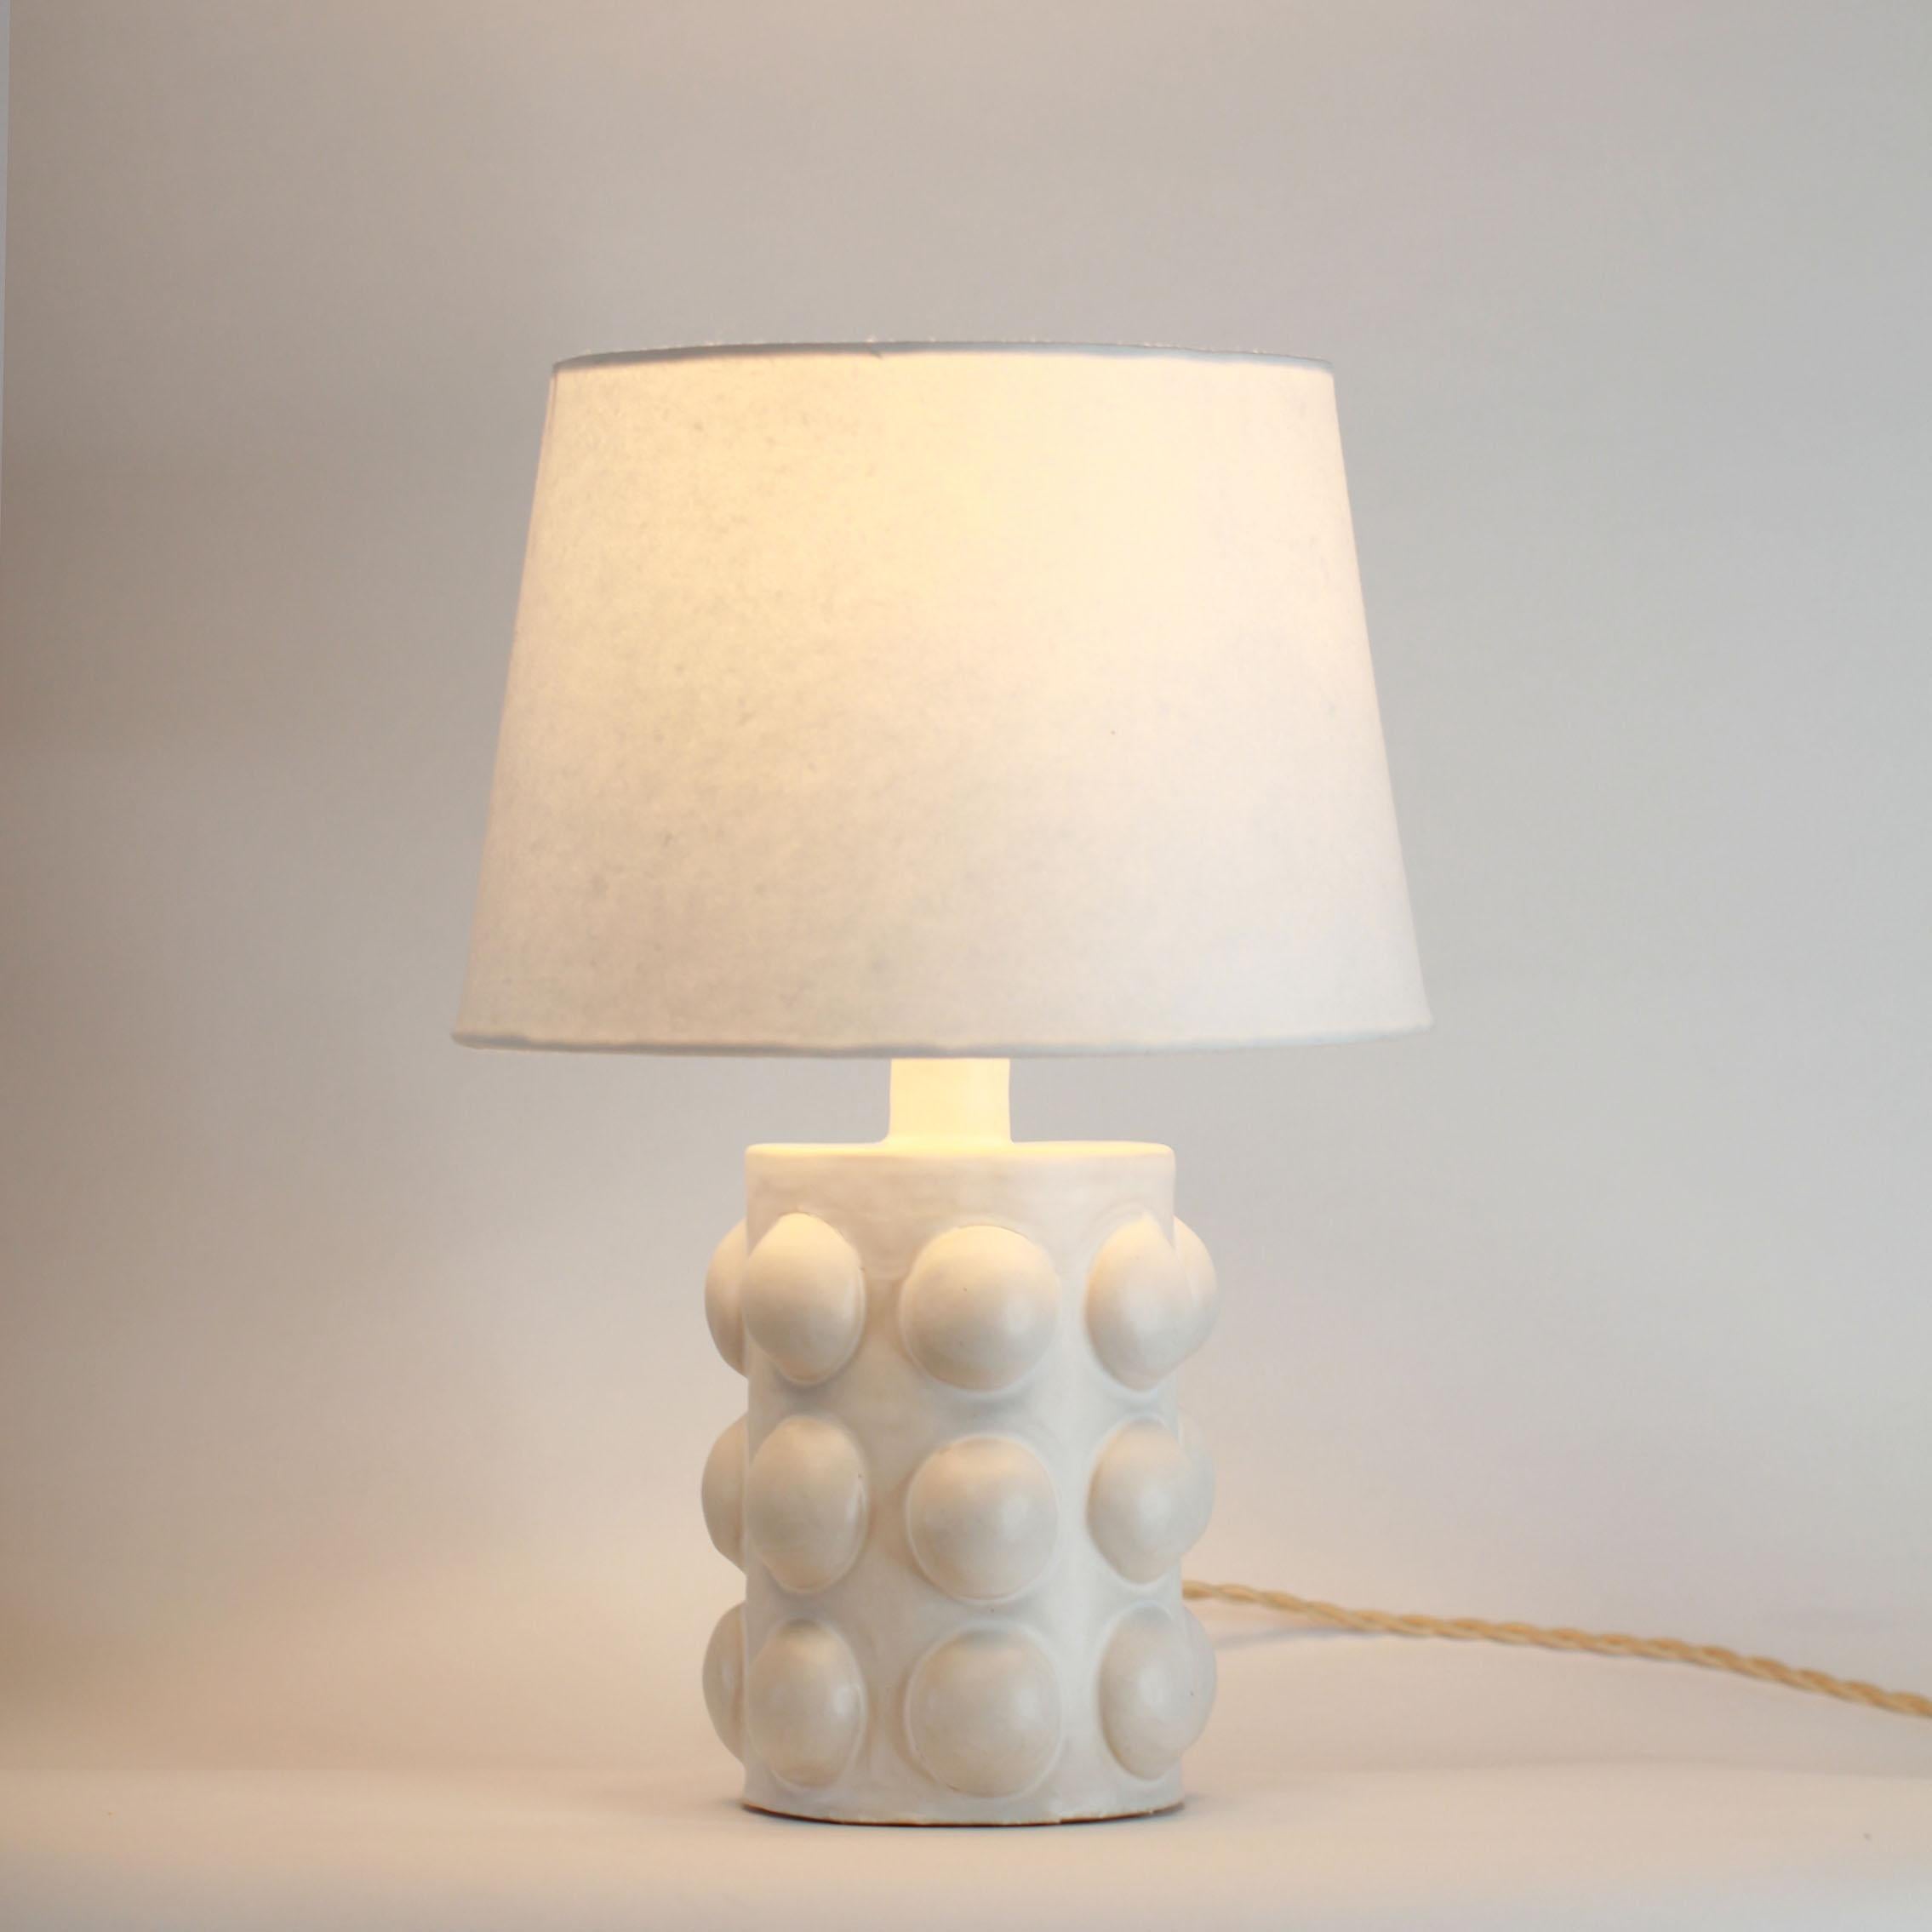 Modern Pair of 'Pastille' Satin White Glazed Ceramic Table Lamps by Design Frères For Sale